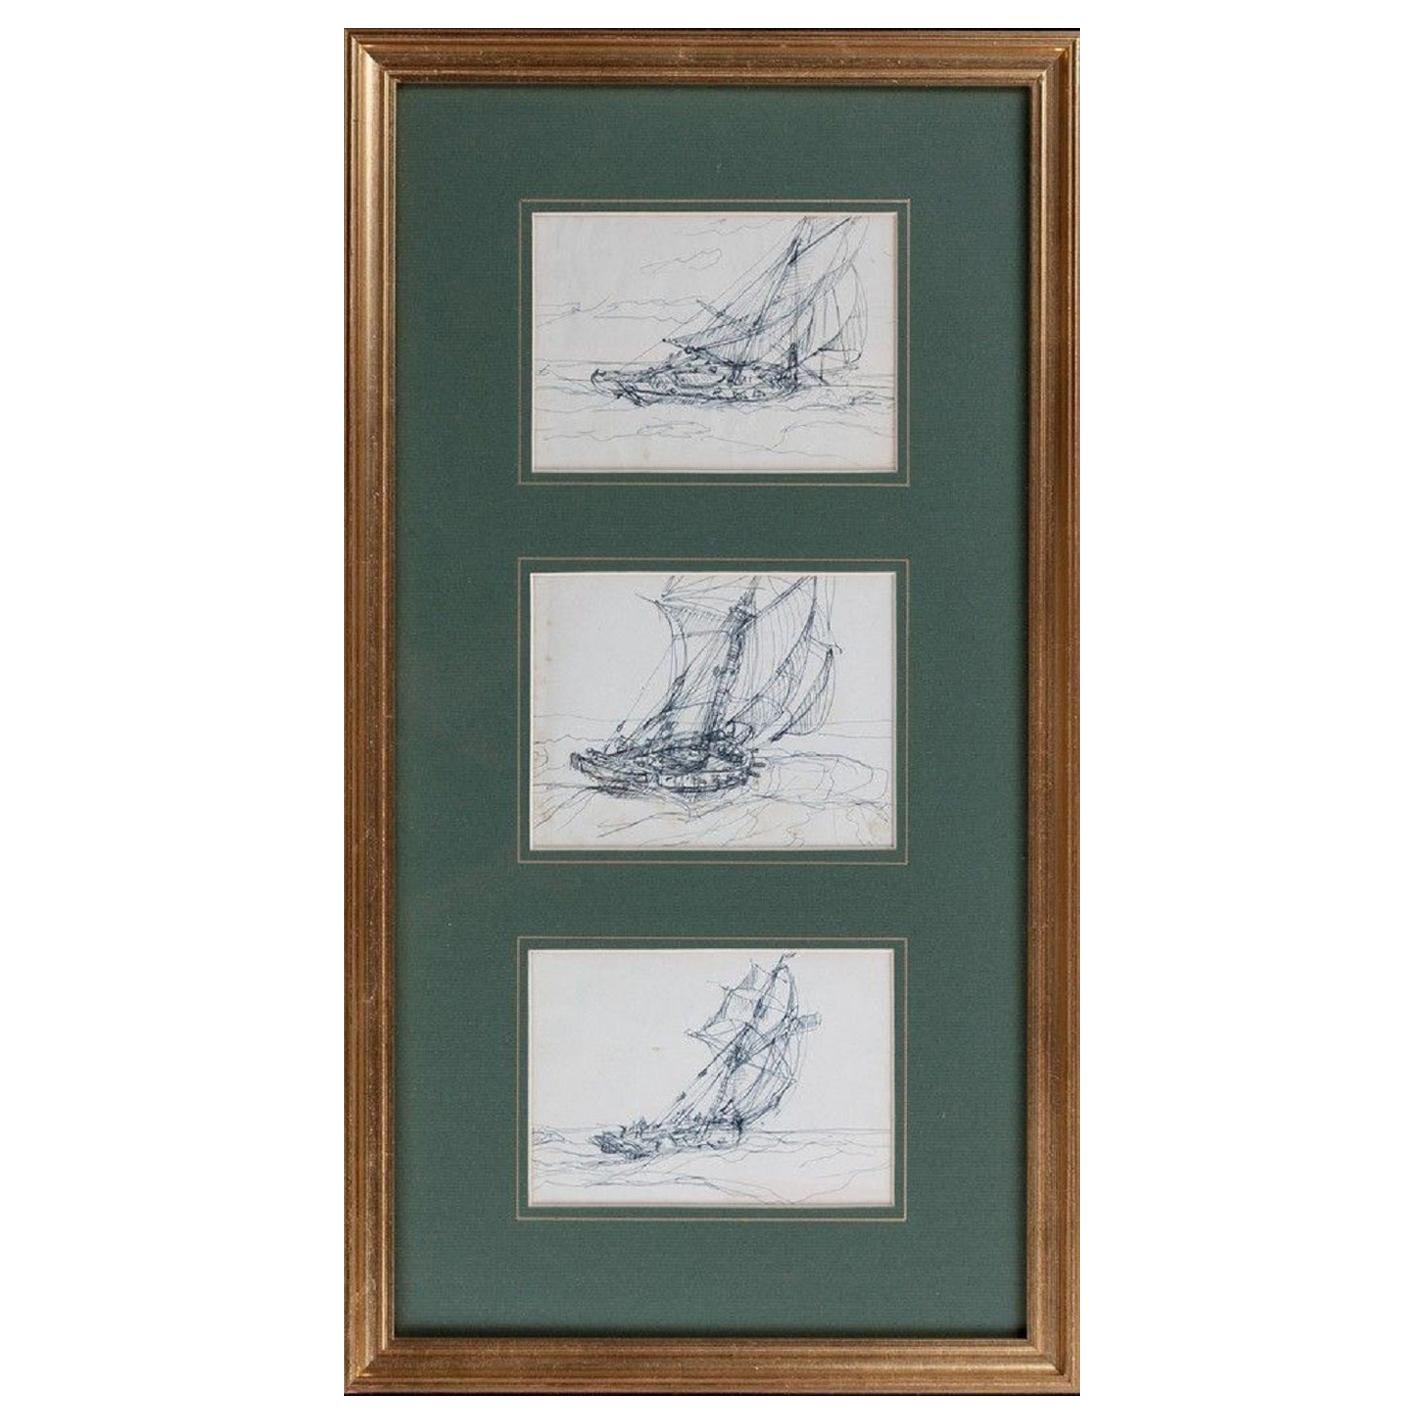 Three Sketches on Post Cards by Montague Dawson RA